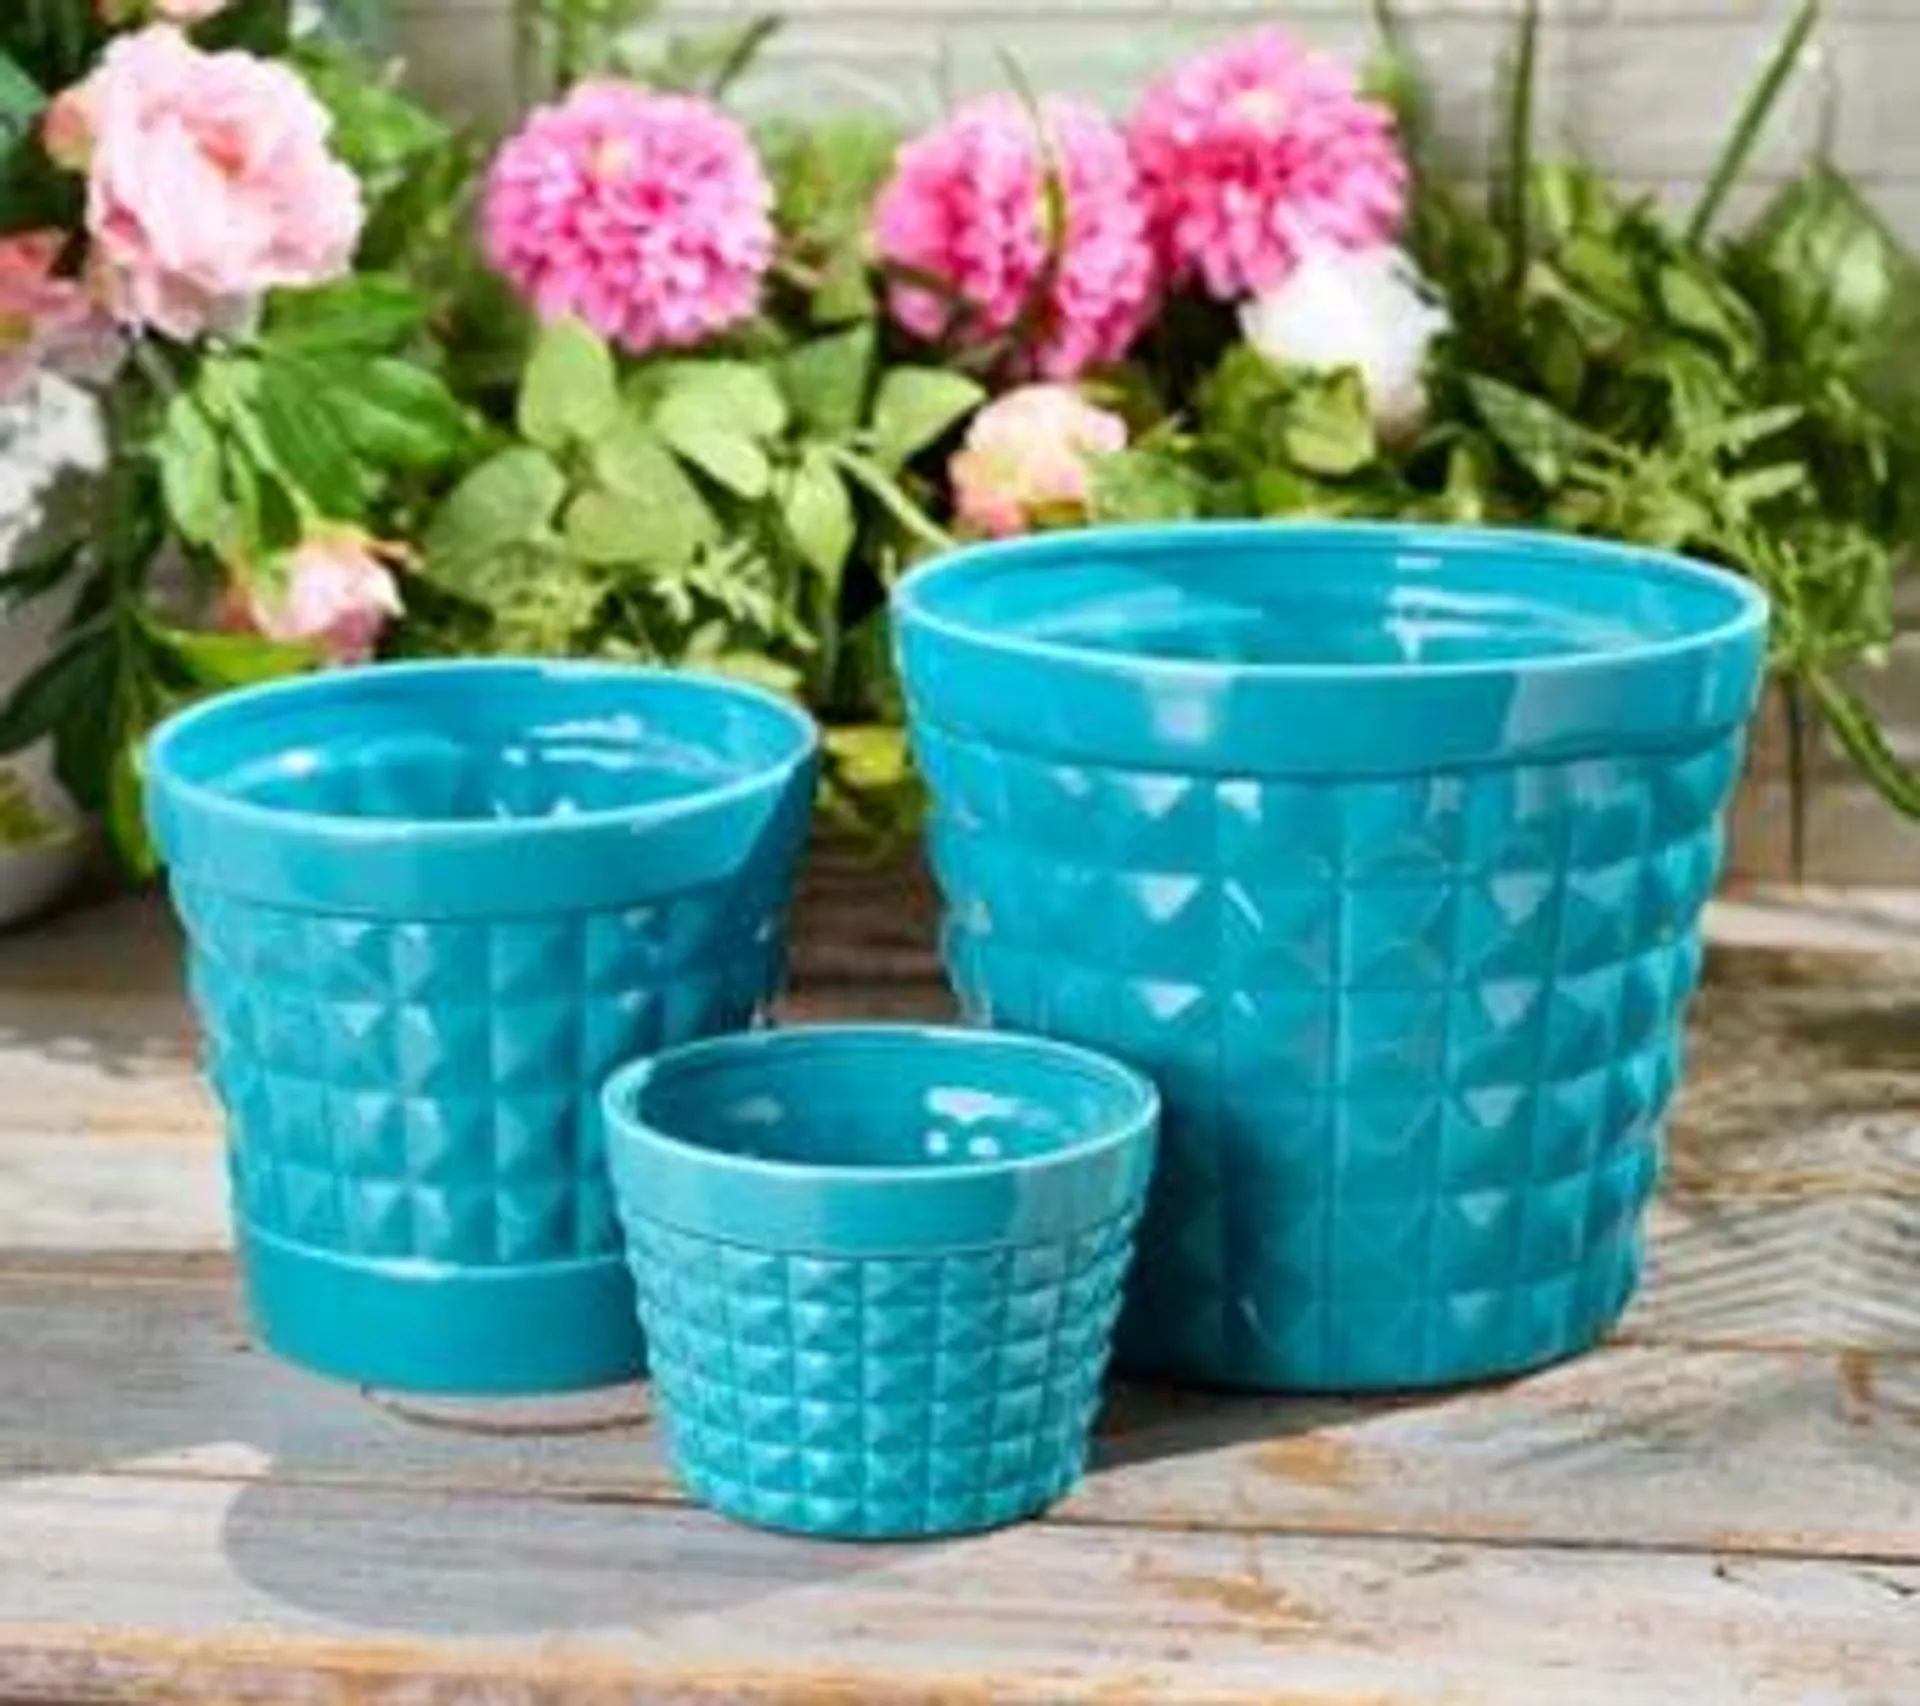 Marigold S/3 Ceramic 12", 9" and 7" Studded Texture Planters